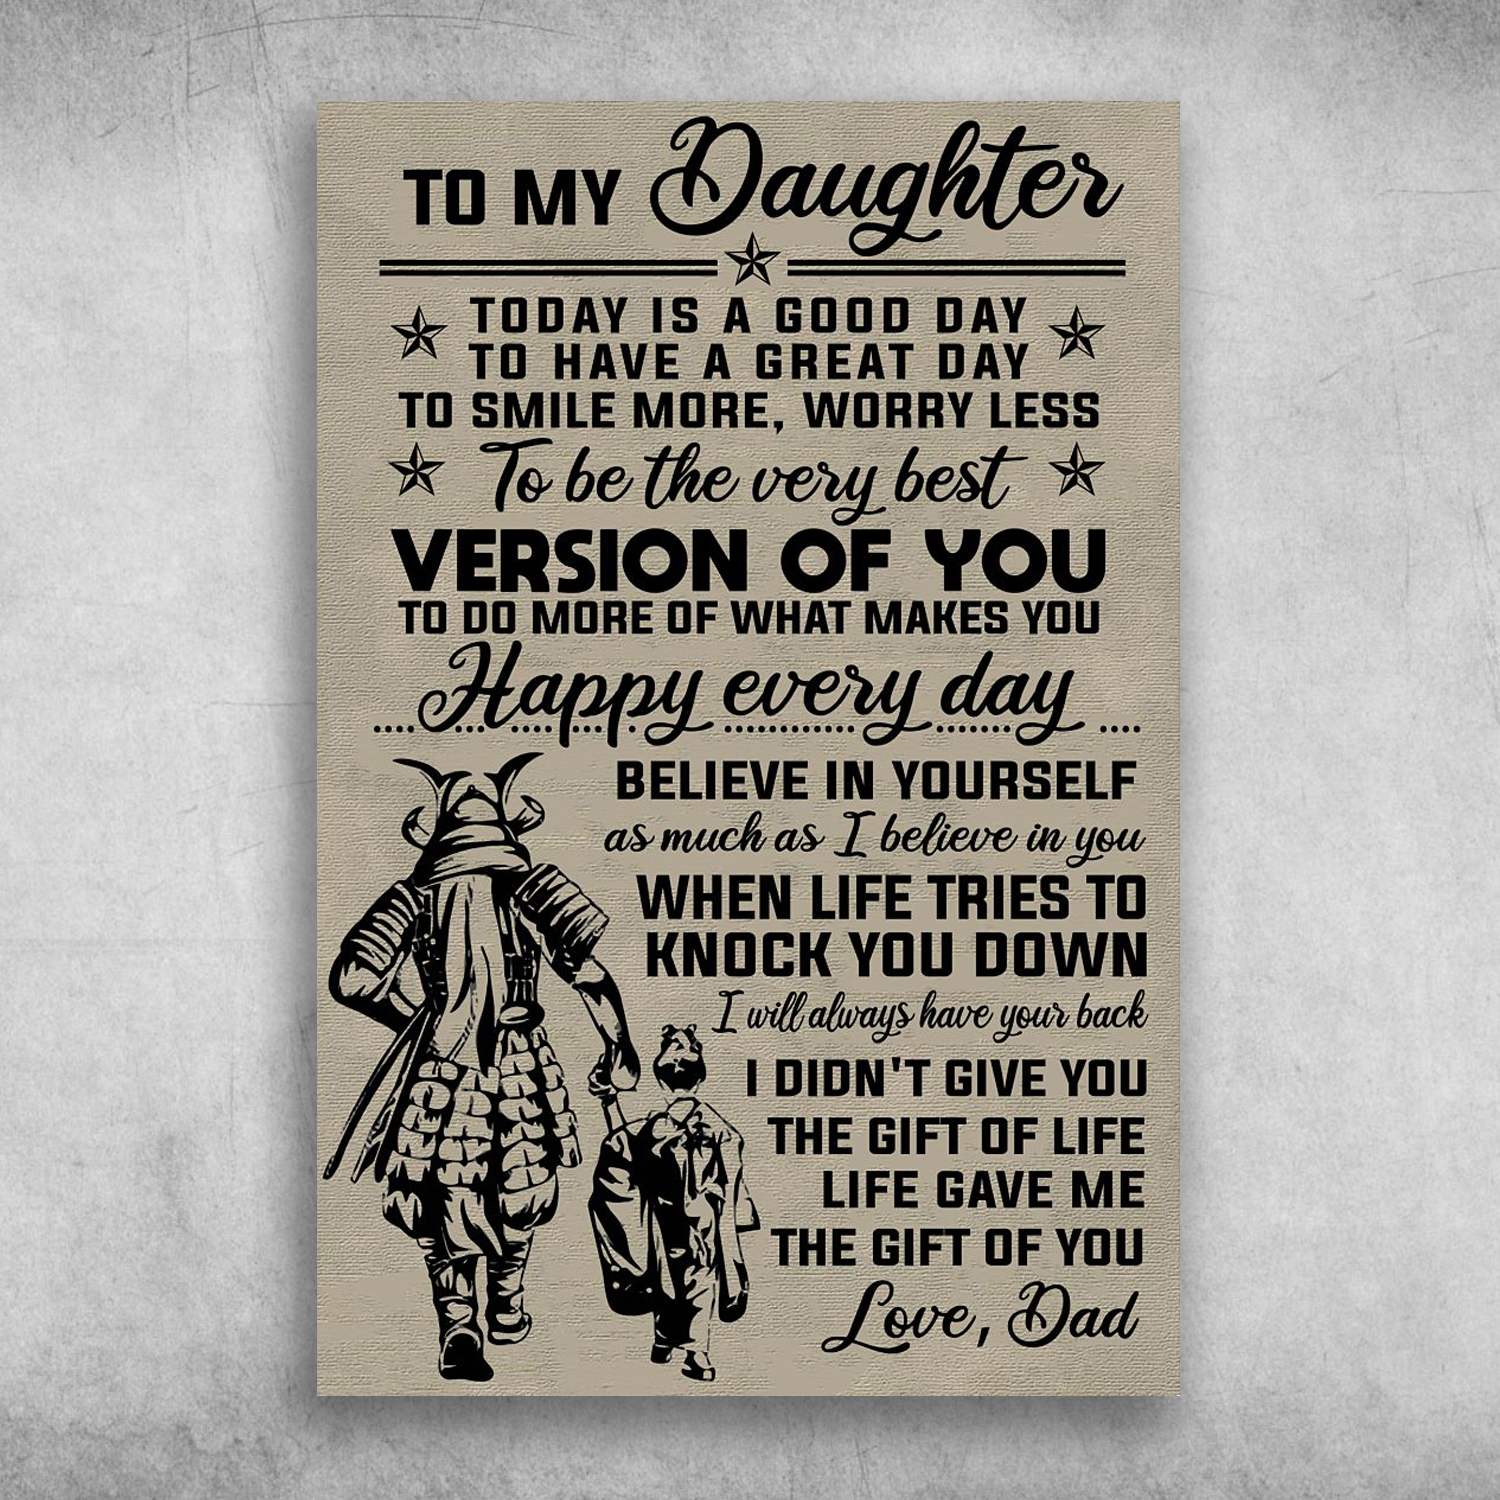 To My Daughter To Be The Very Best Version Of You Love Dad